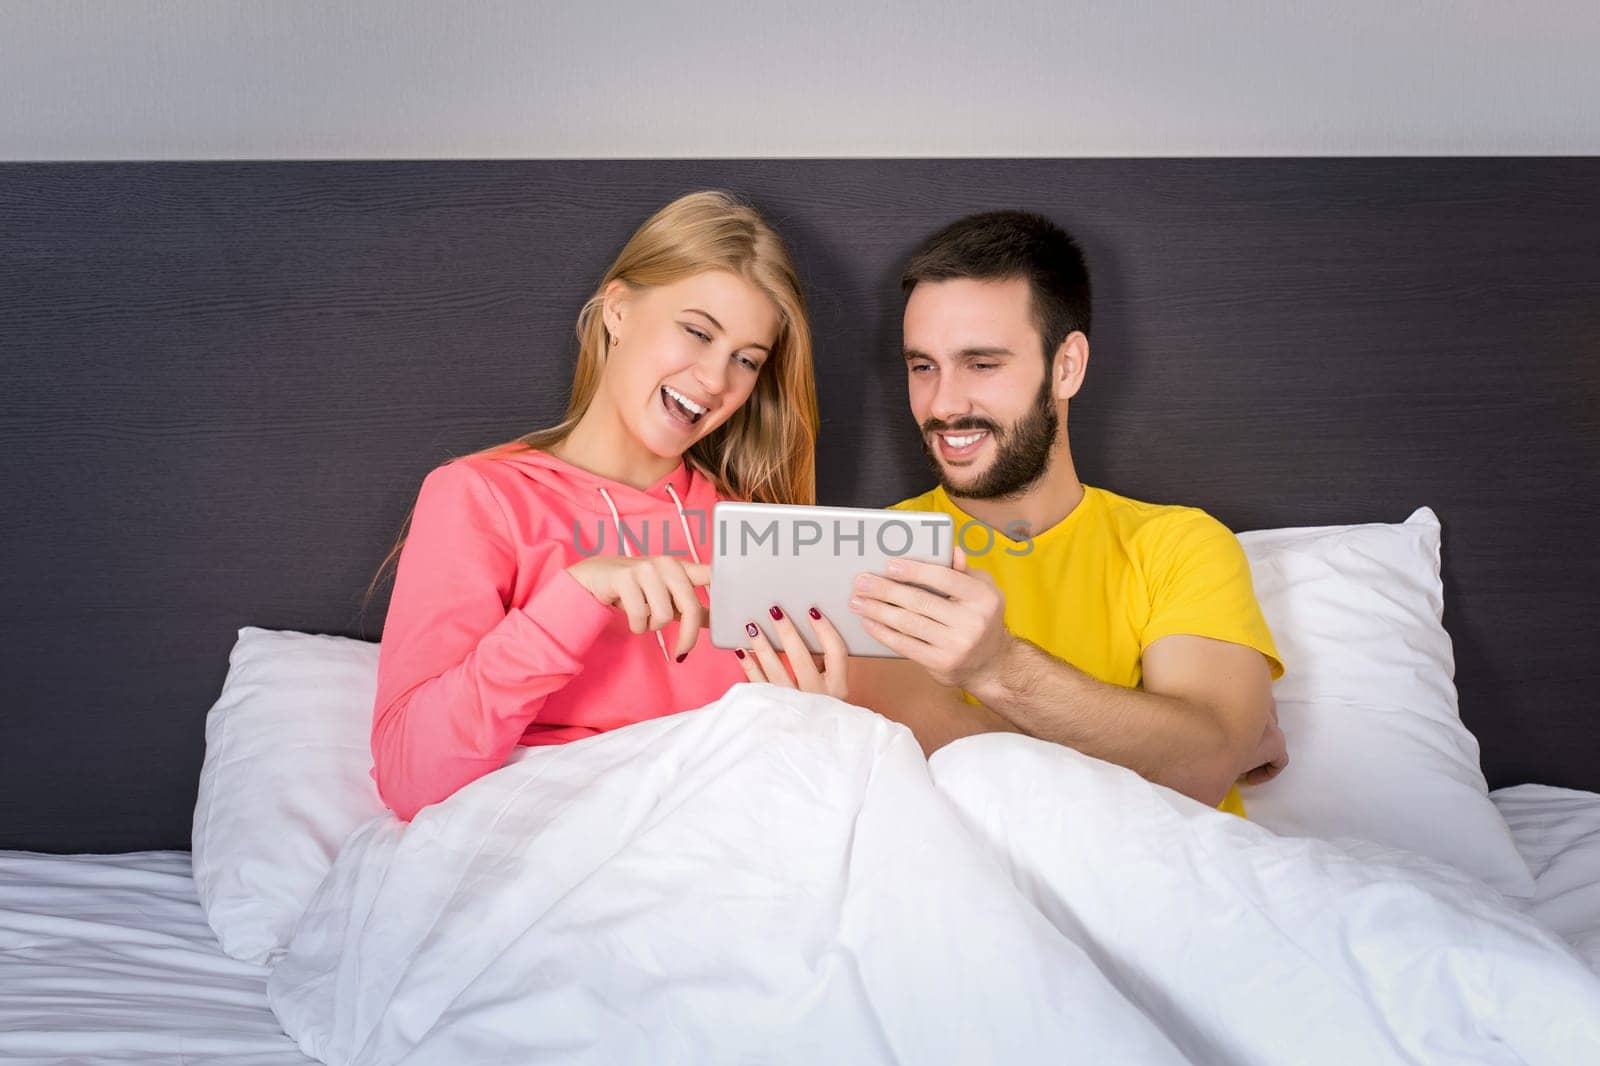 Young Sweet Couple on Bed Watching Something on Tablet Gadget. Concept about technology and people